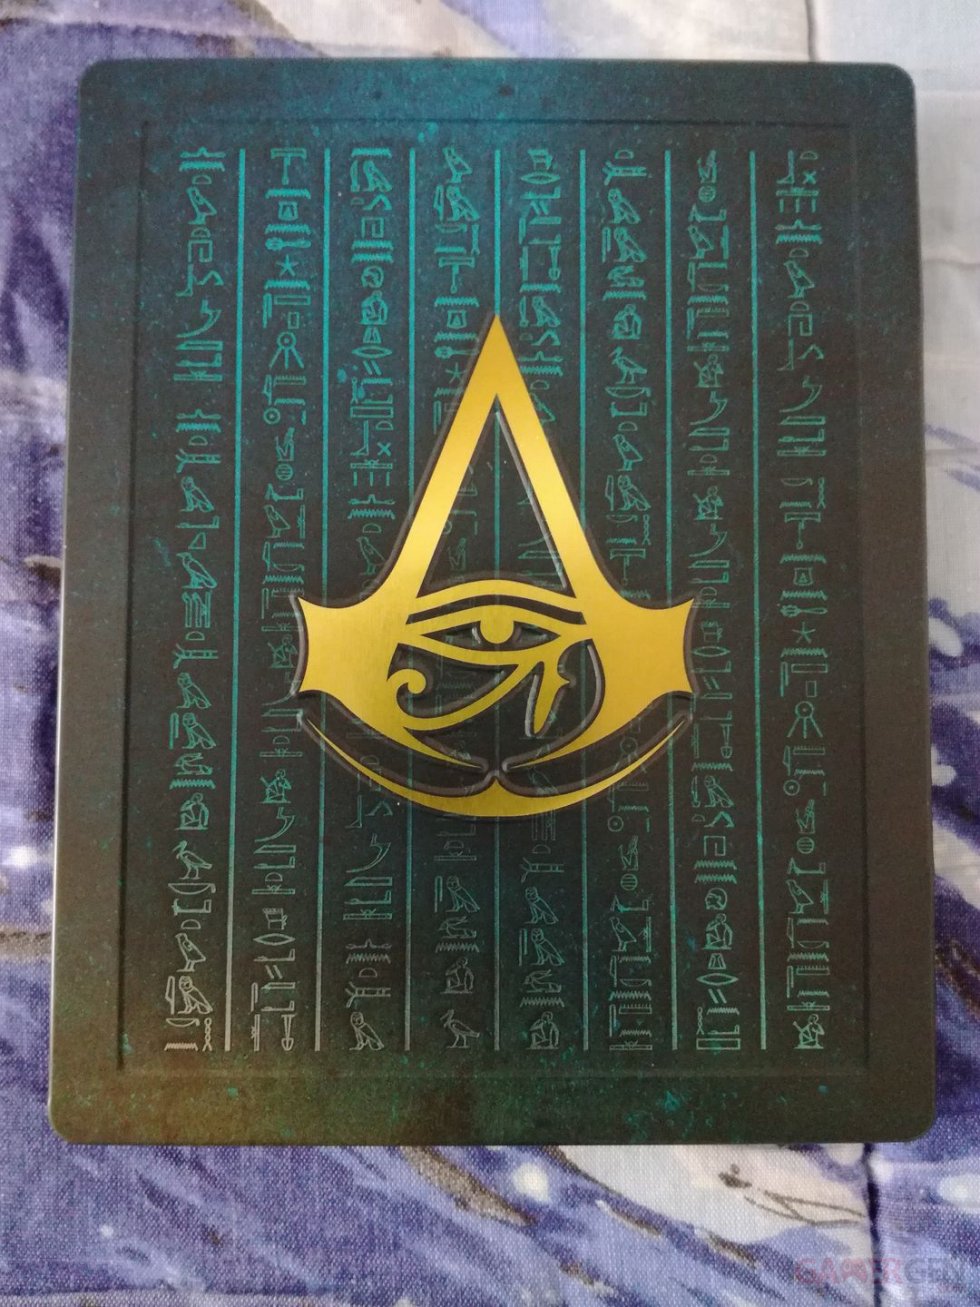 Assassin-Creed-Origins-collector-Dawn-of-the-Creed-unboxing-déballage-08-31-10-2017